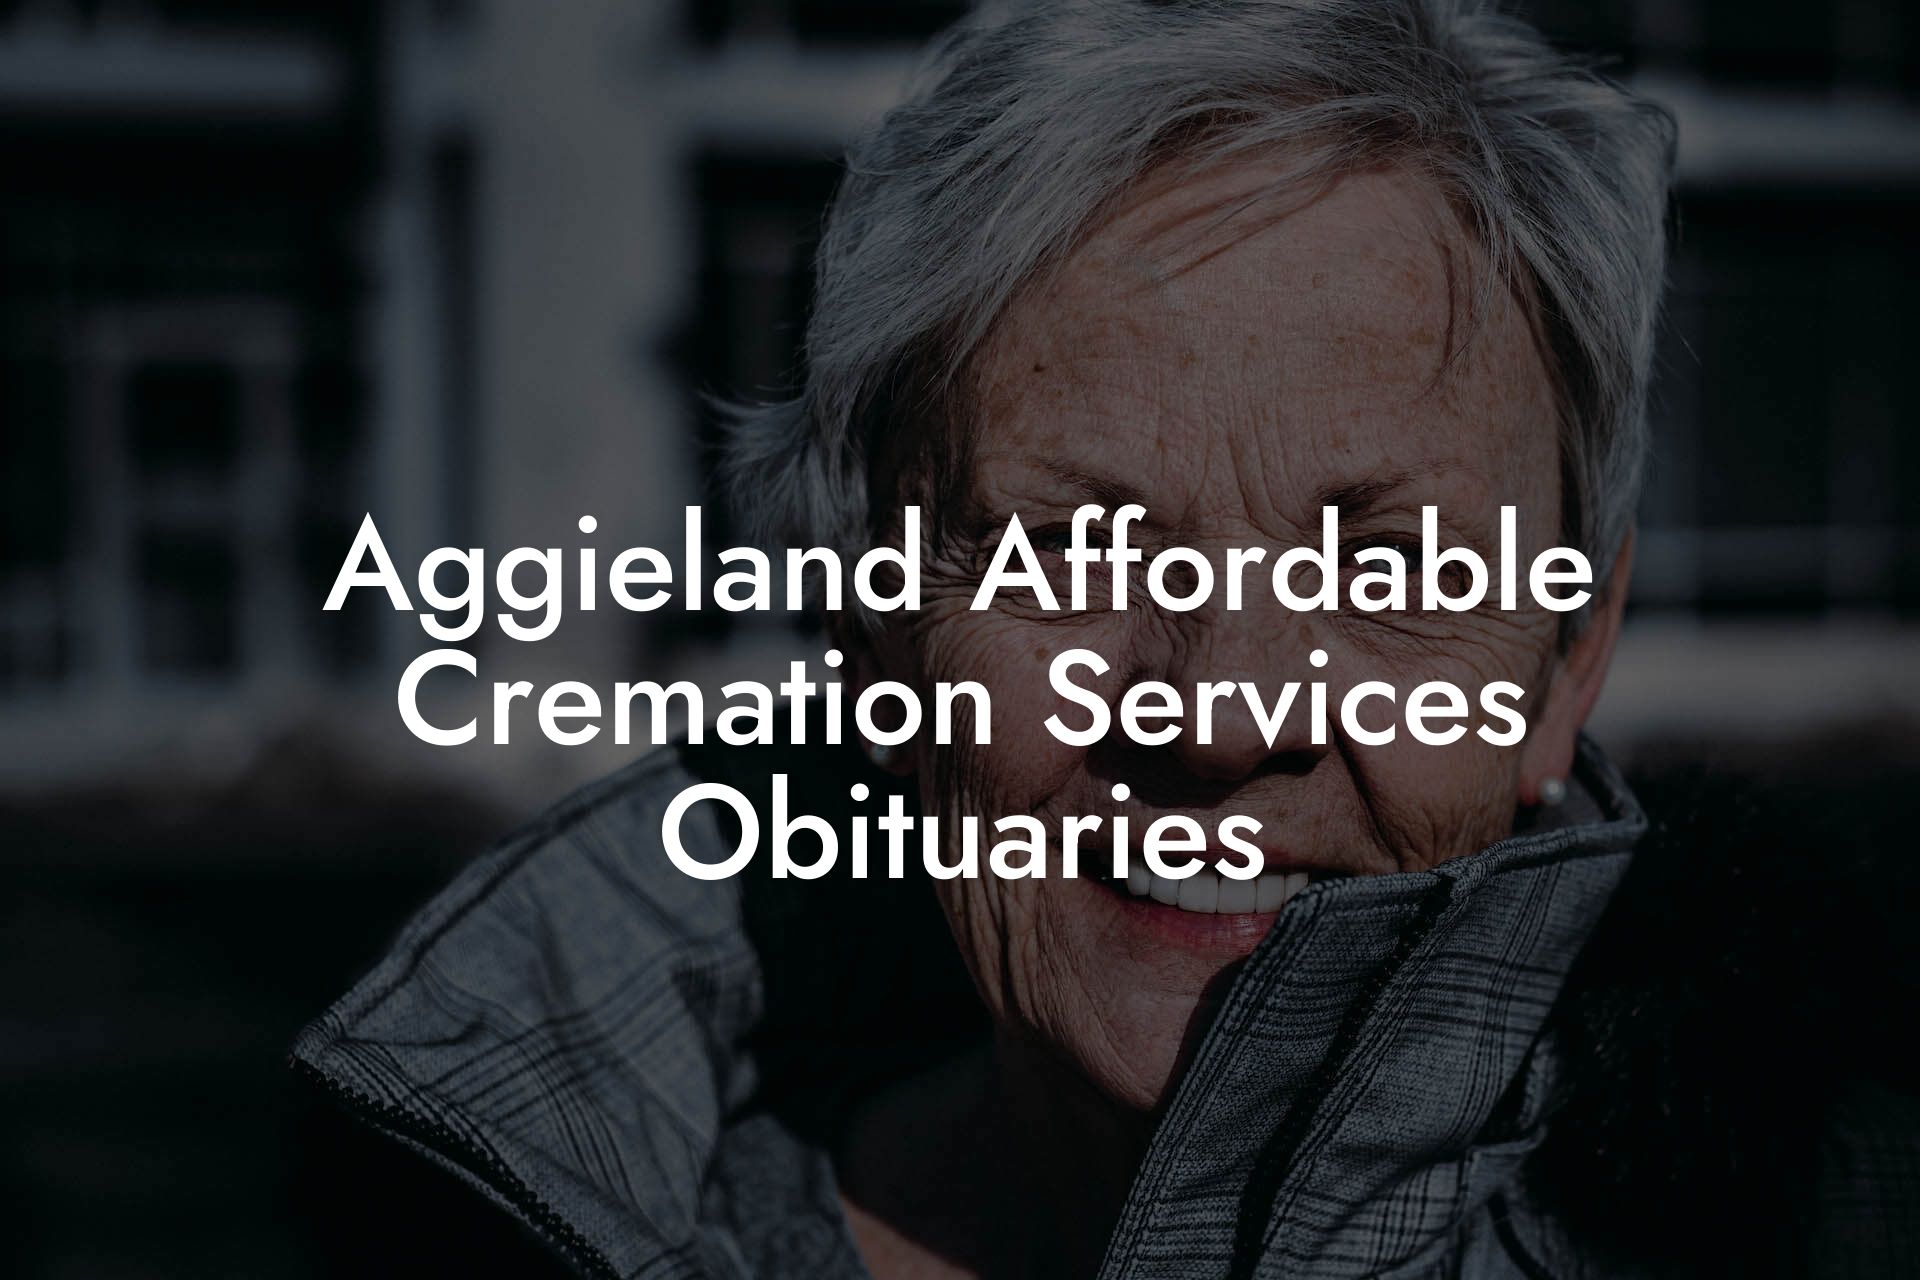 Aggieland Affordable Cremation Services Obituaries